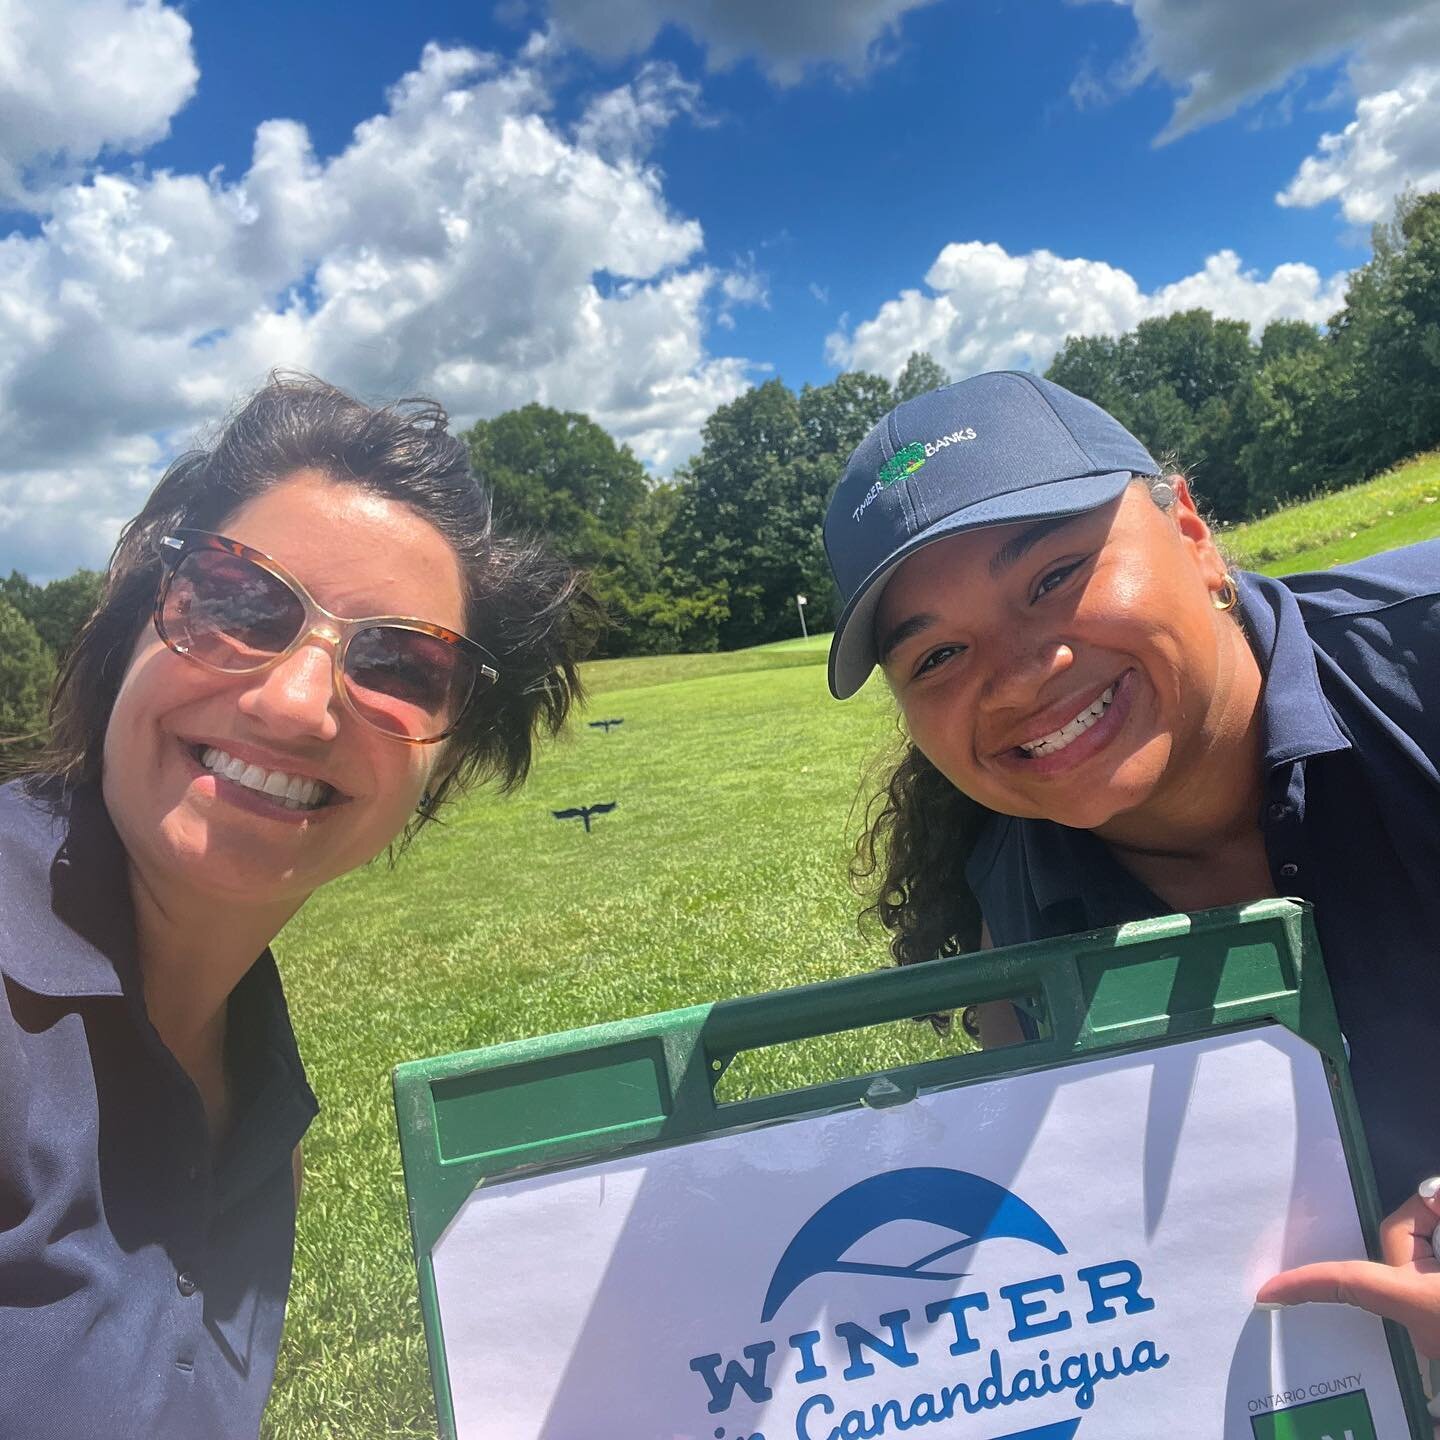 ⛳️ Winter in Canandaigua goes golfing! Did you spy our tee sign at the @onchamber NeoClassic golf tournament today? Thanks for the pic, Emily and Erica! #winterincanandaigua